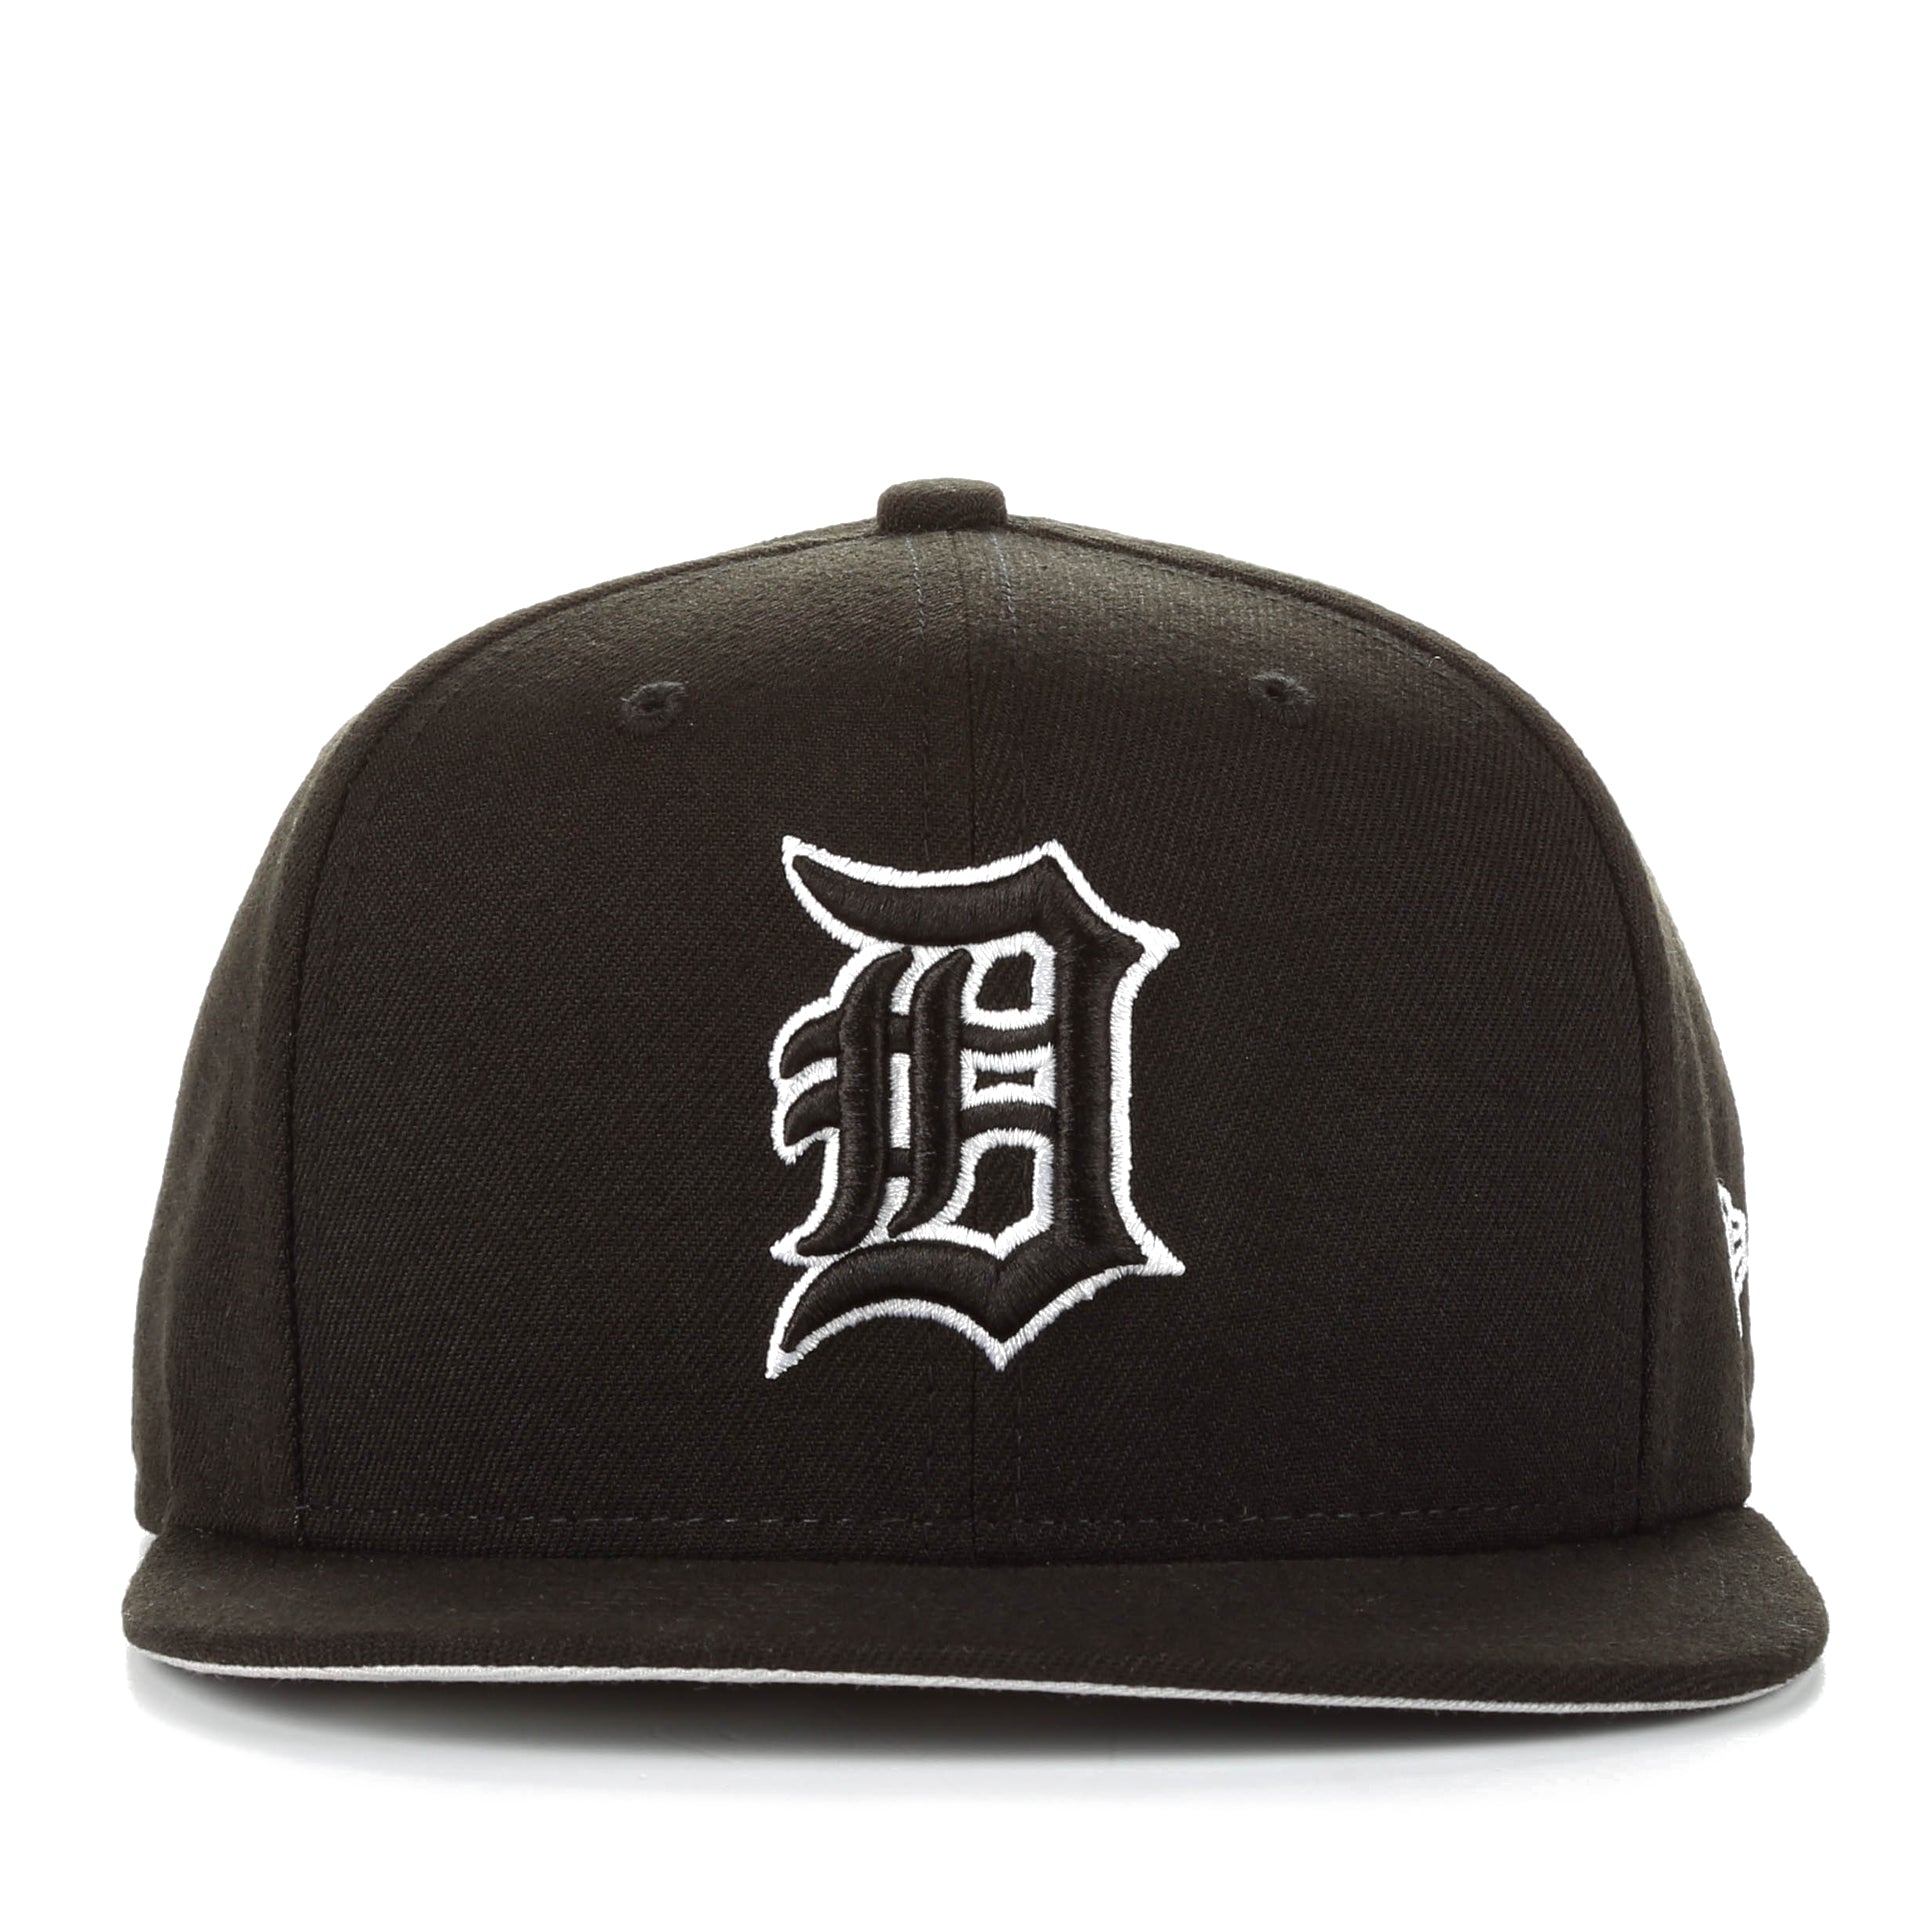 Essential 59Fifty Black Fitted - New Era cap